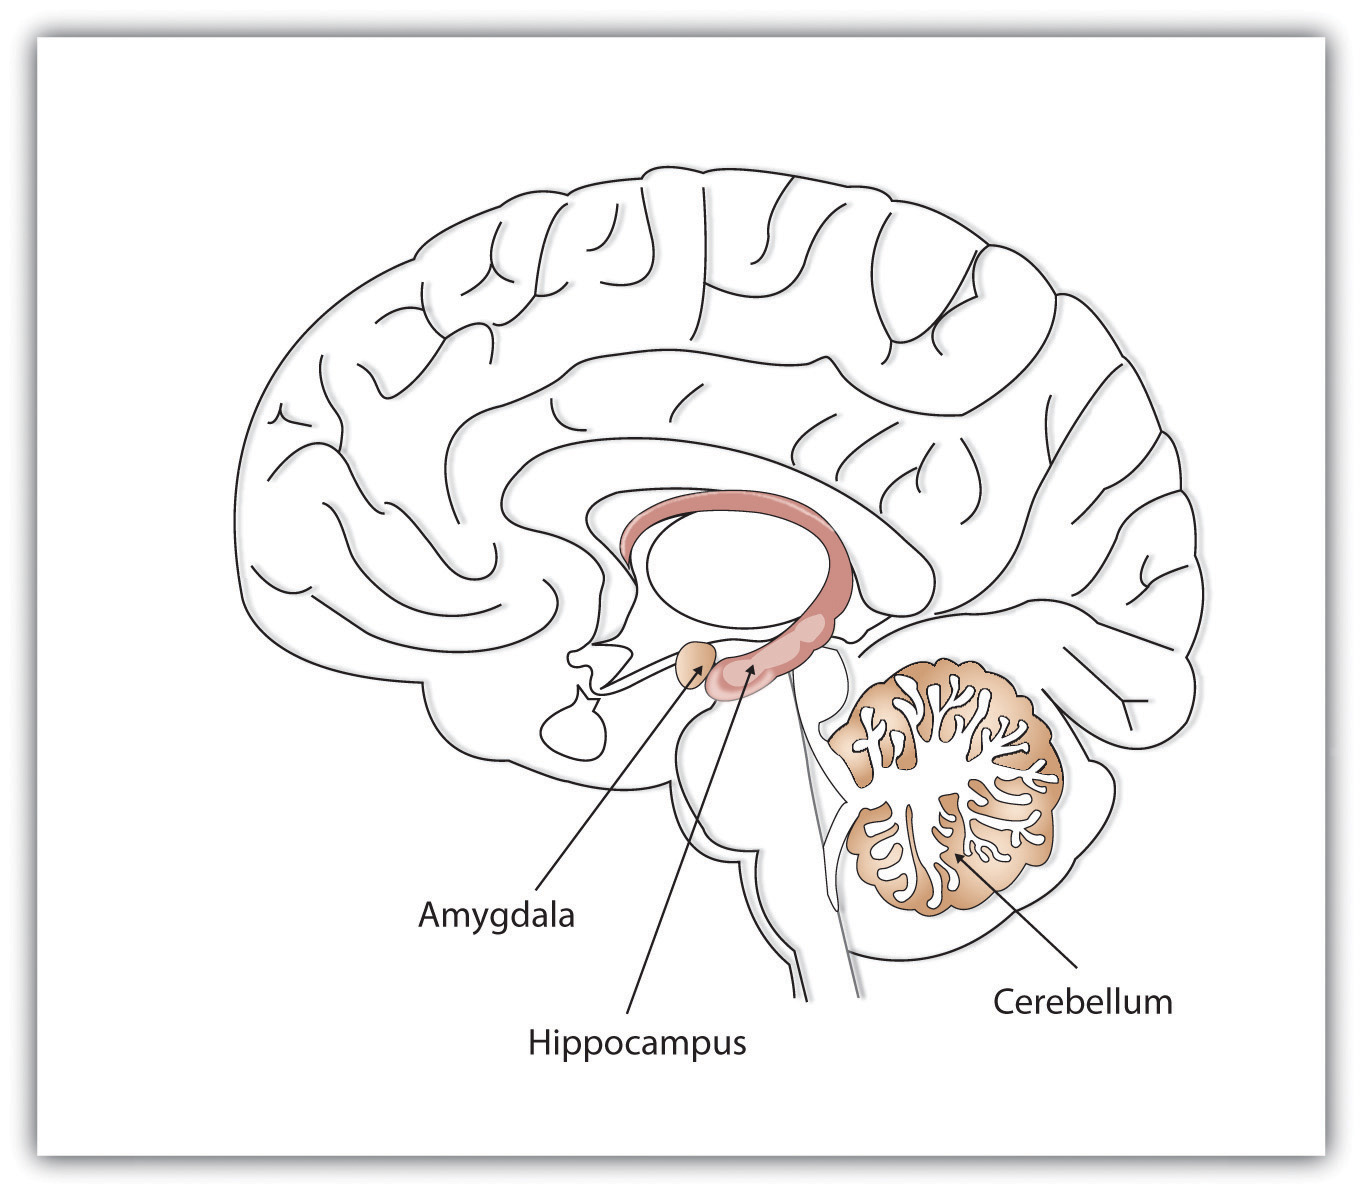 Drawing of midline section of human brain showing locations of cerebellum, hippocampus, and amygdala.  See text.